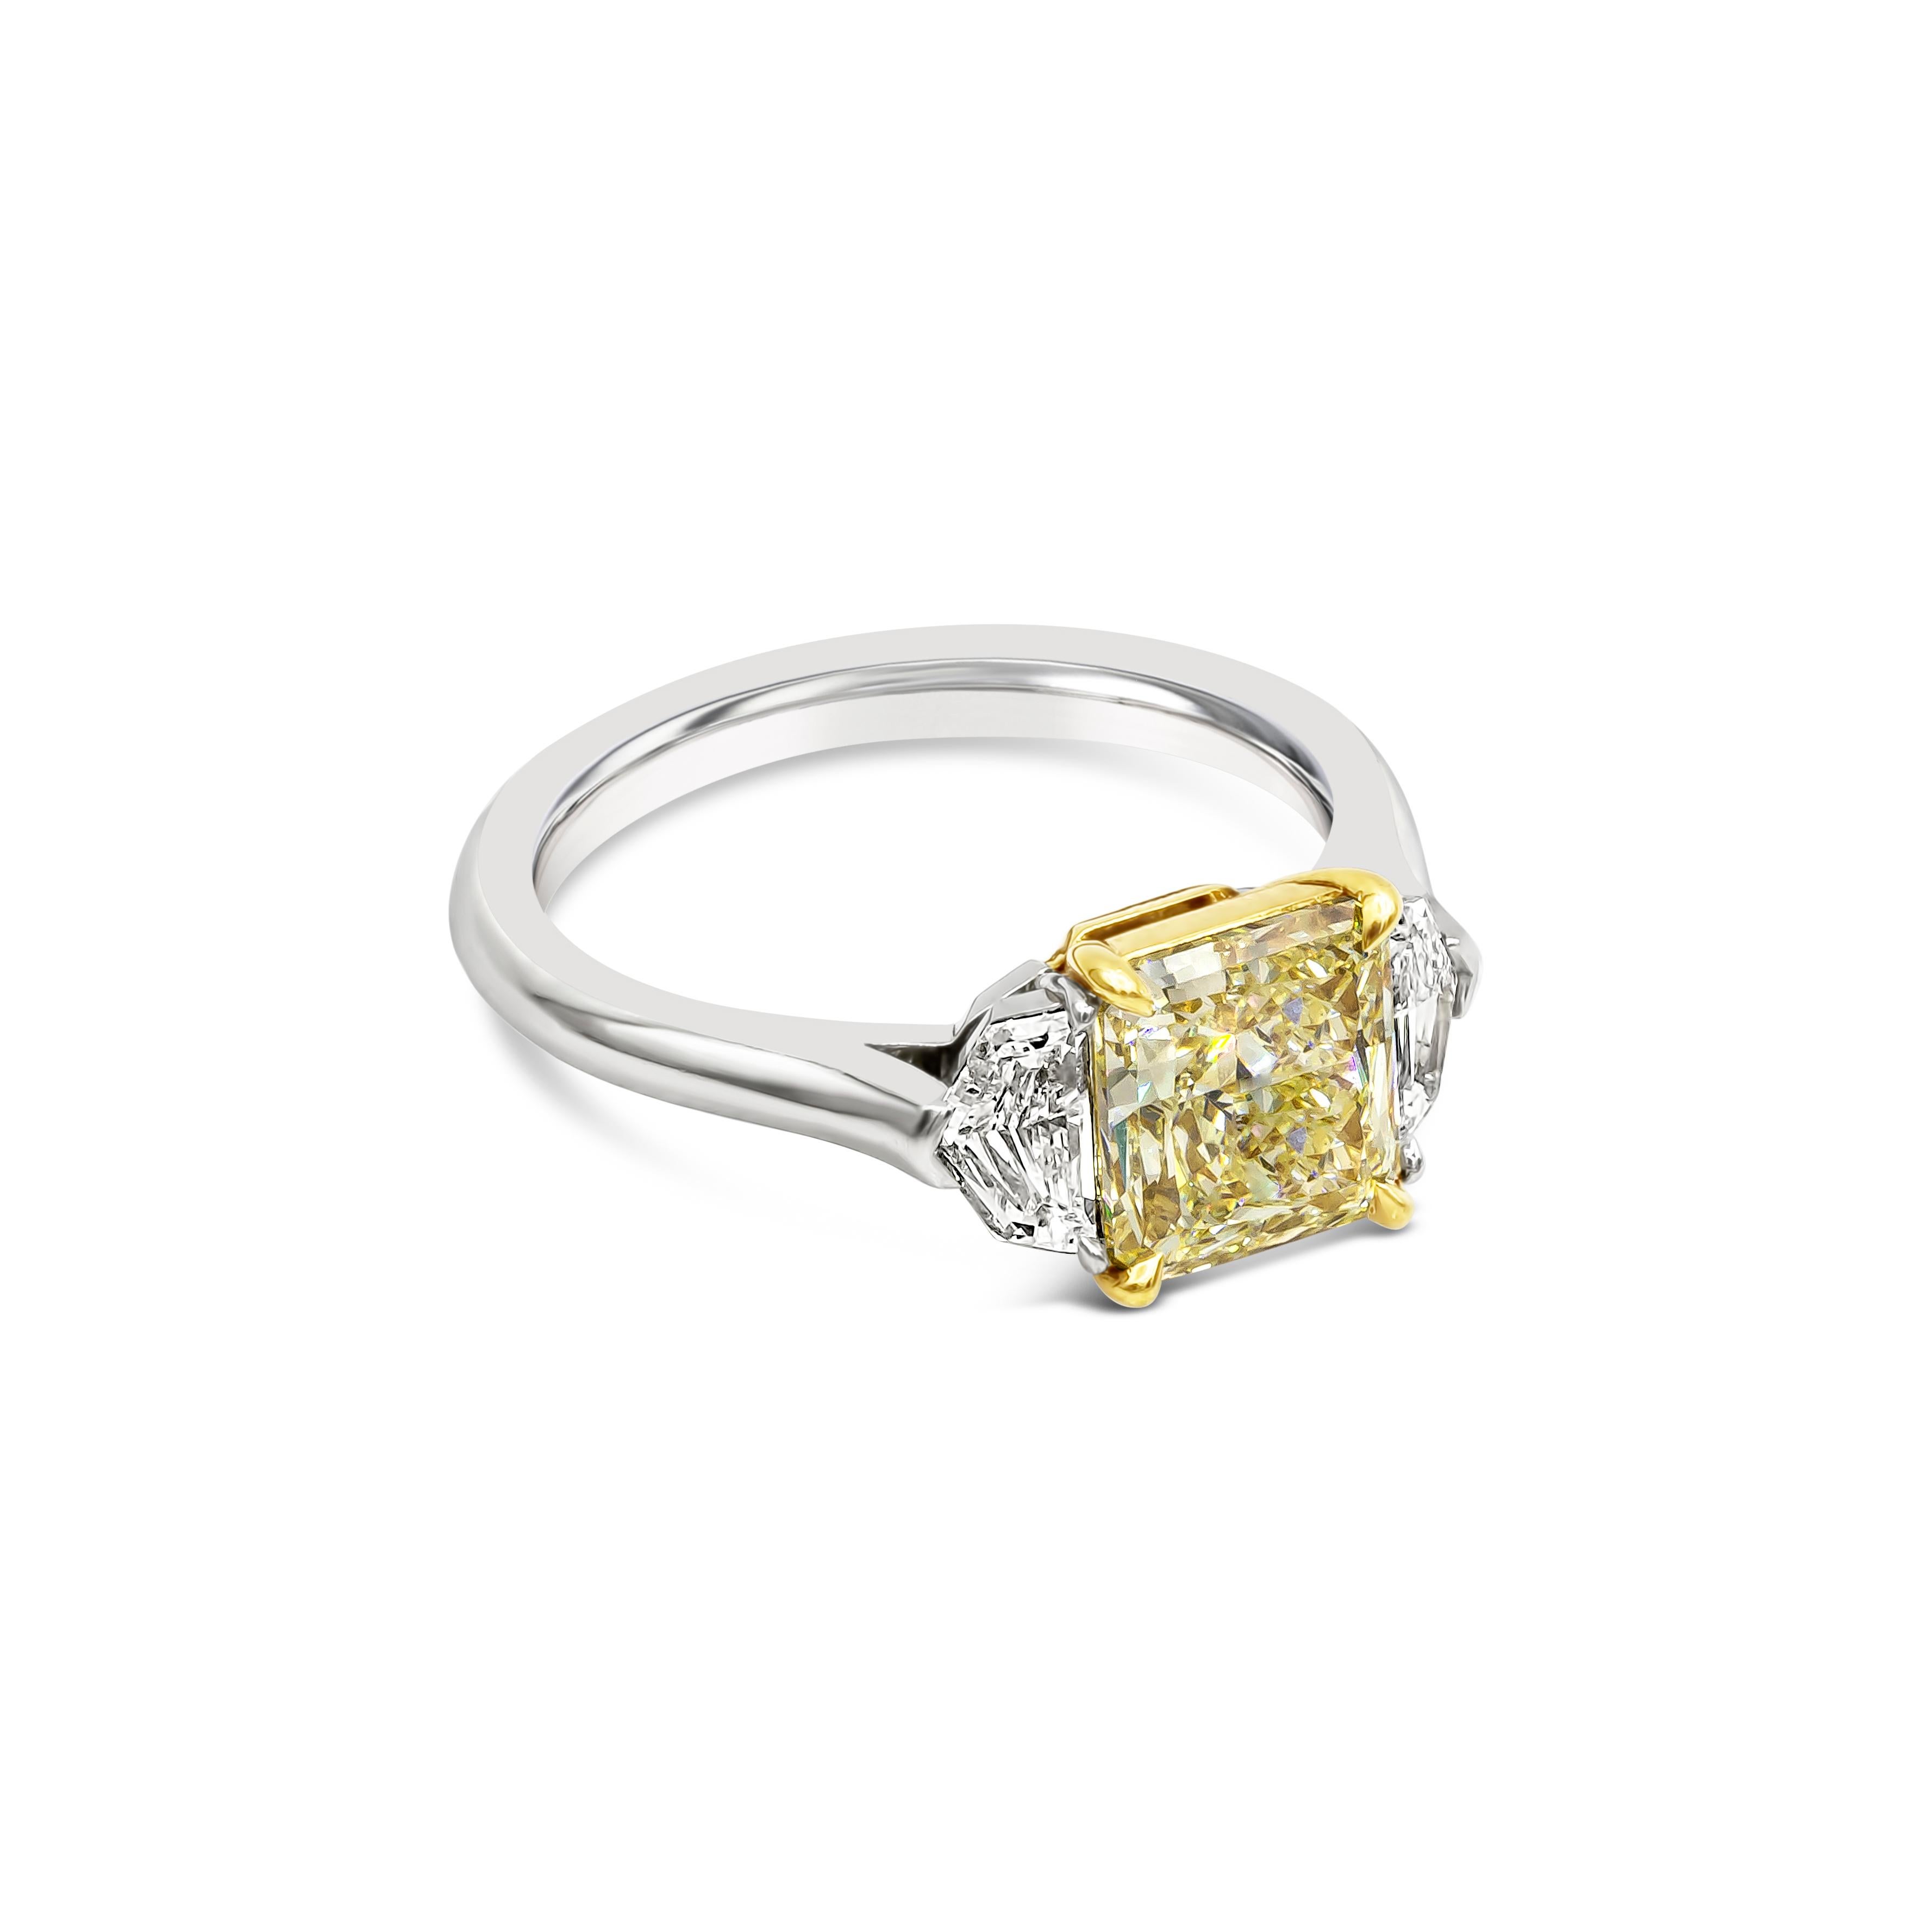 A gorgeous 2.01 carat radiant cut yellow diamond that GIA certified as Y-Z color, VS1 clarity, takes center stage in this three stone engagement ring. Flanking the center diamond are two shield cut diamonds weighing 0.47 carats total. Set in a 18k